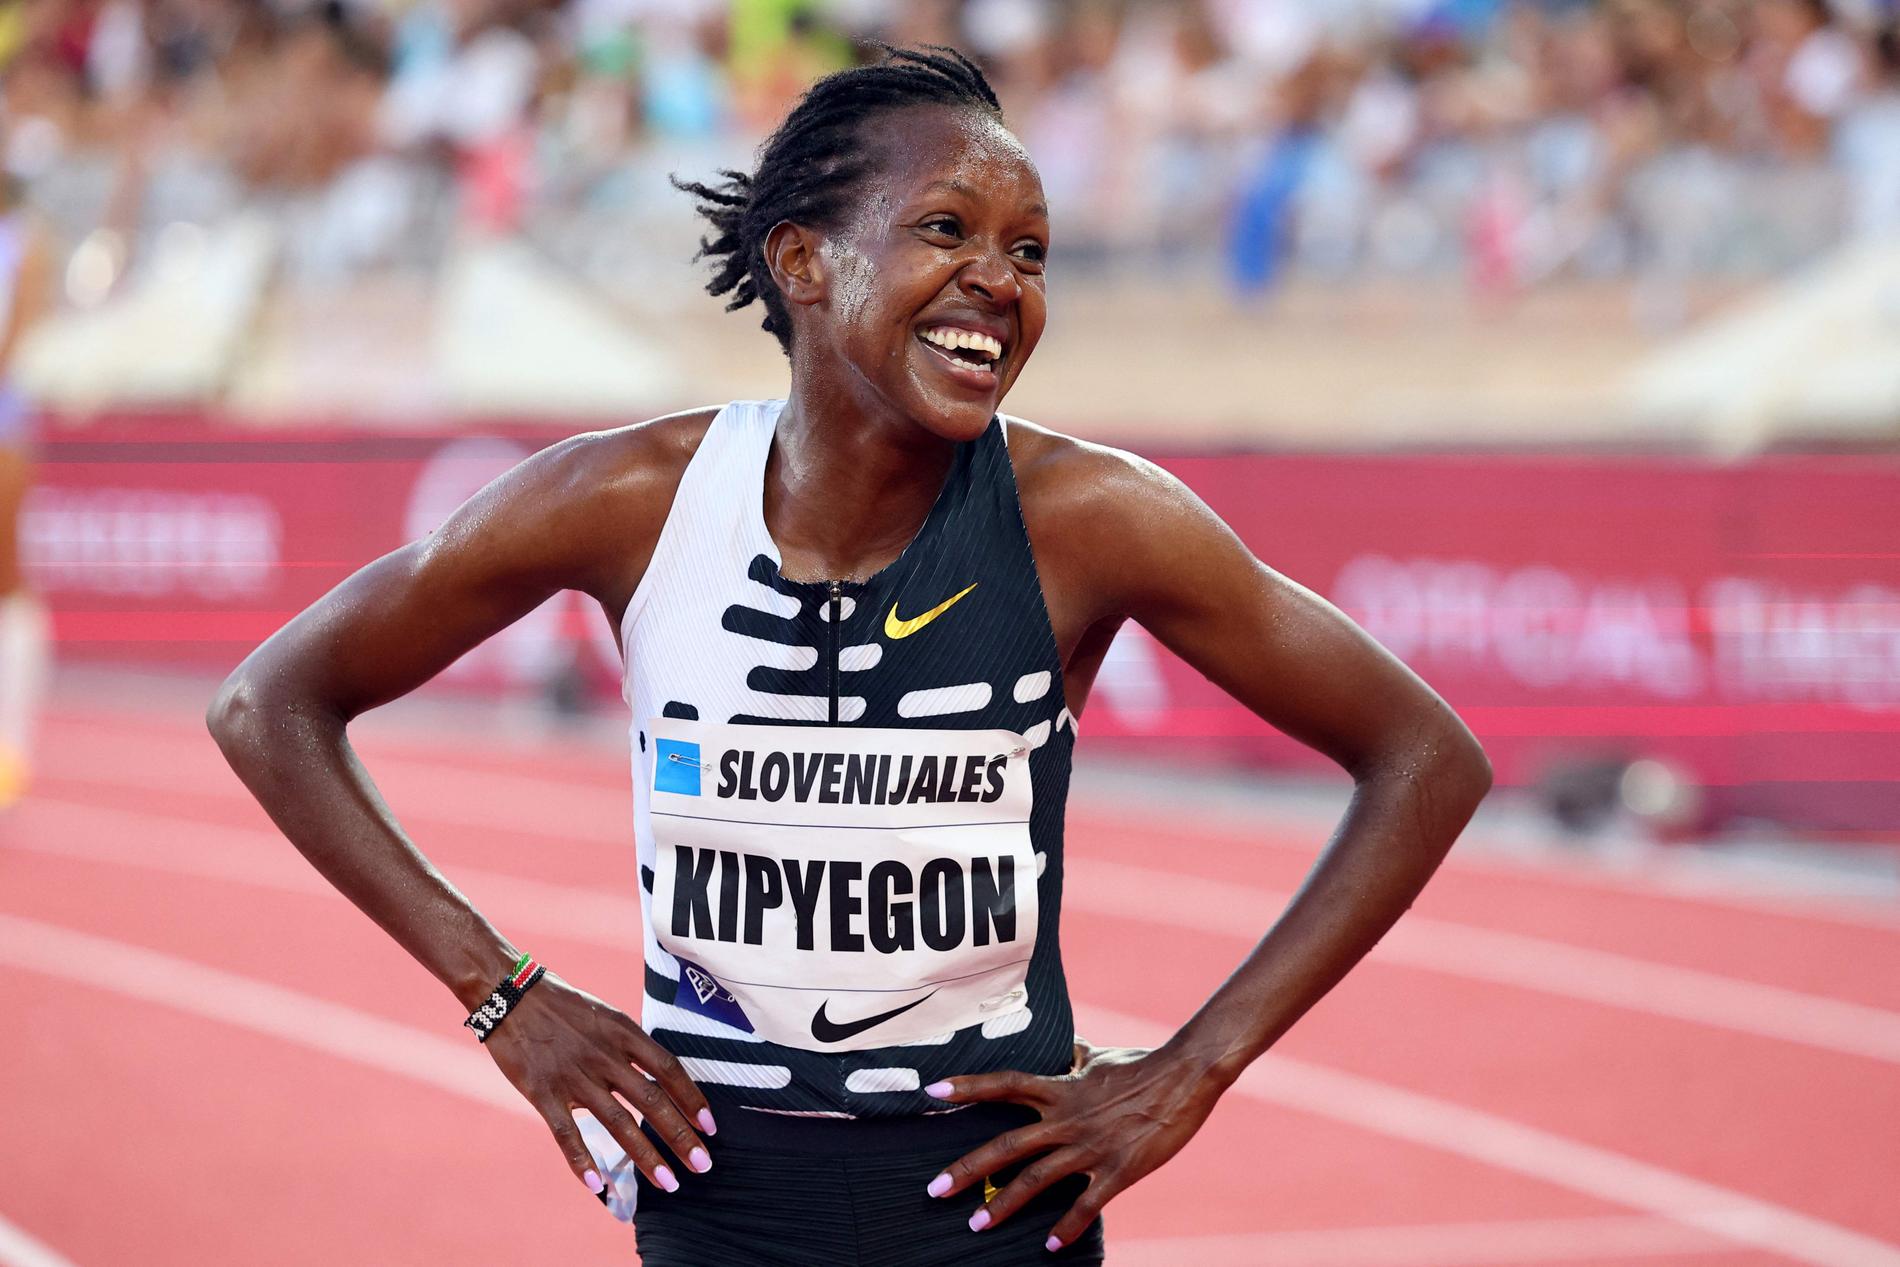 Faith Kipyegon: The Olympic Champion and Record Breaker Who Defies Motherhood